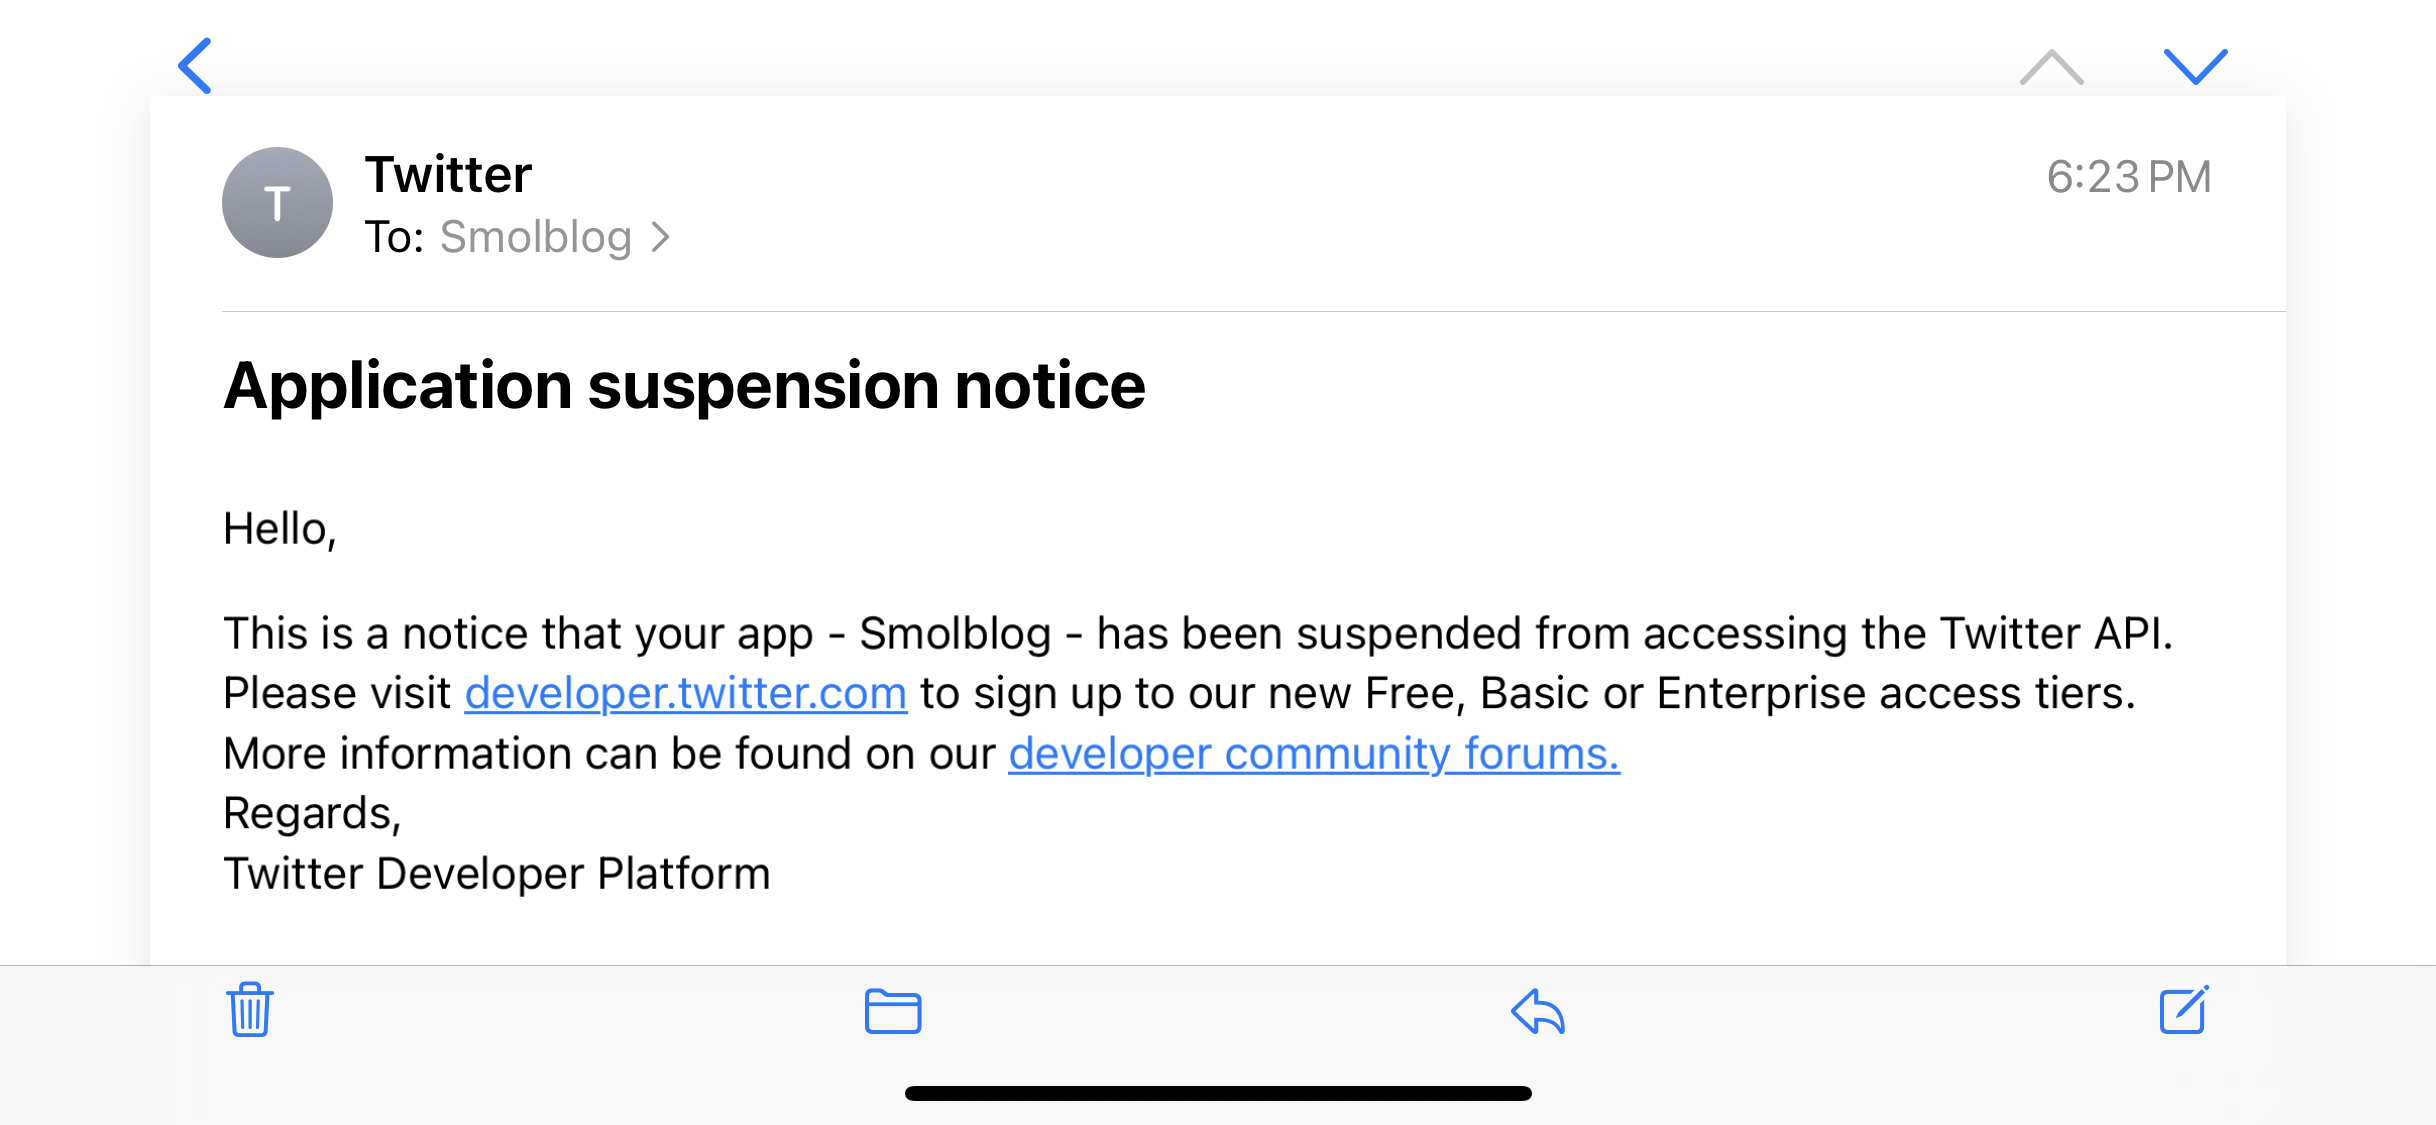 Hello, This is a notice that your app - Smolblog - has been suspended from accessing the Twitter API.  Please visit developer.twitter.com to sign up to our new Free, Basic or Enterprise access tiers.  More information can be found on our developer community forums.  Regards,  Twitter Developer Platform 